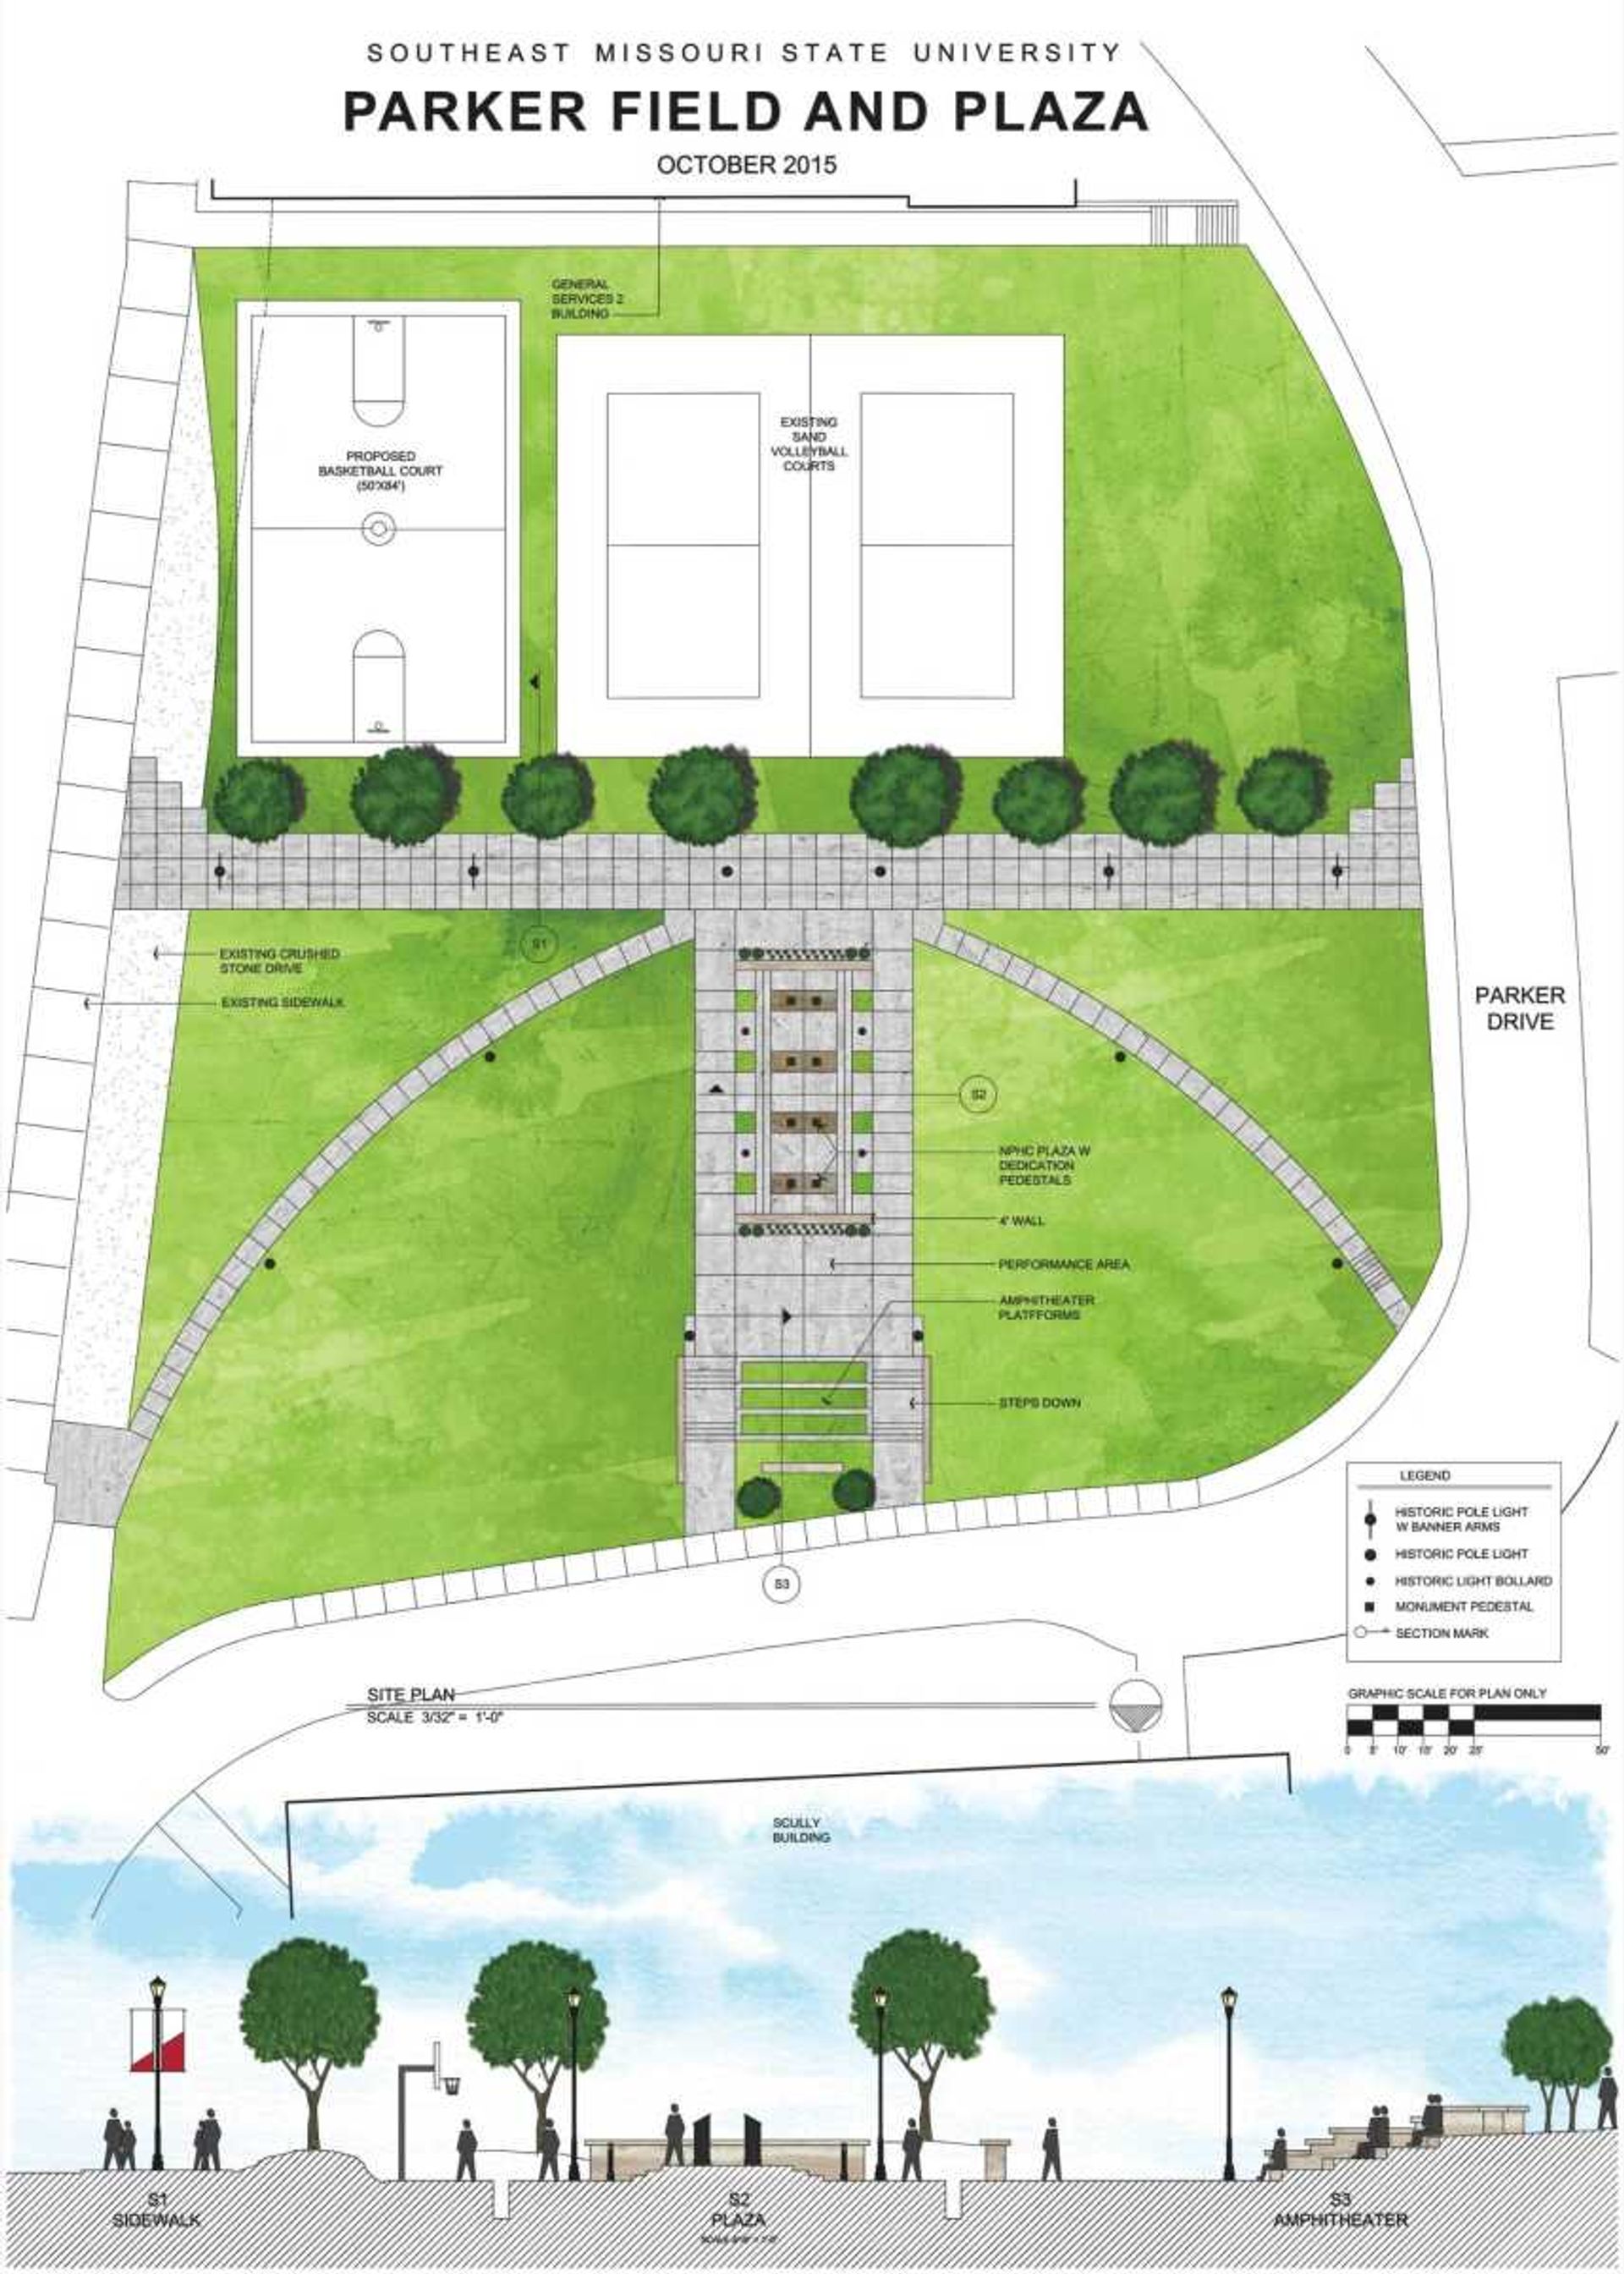 A preliminary drawing of the Parker Field renovation depicting different aspects of the plan. No renovations have been confirmed.